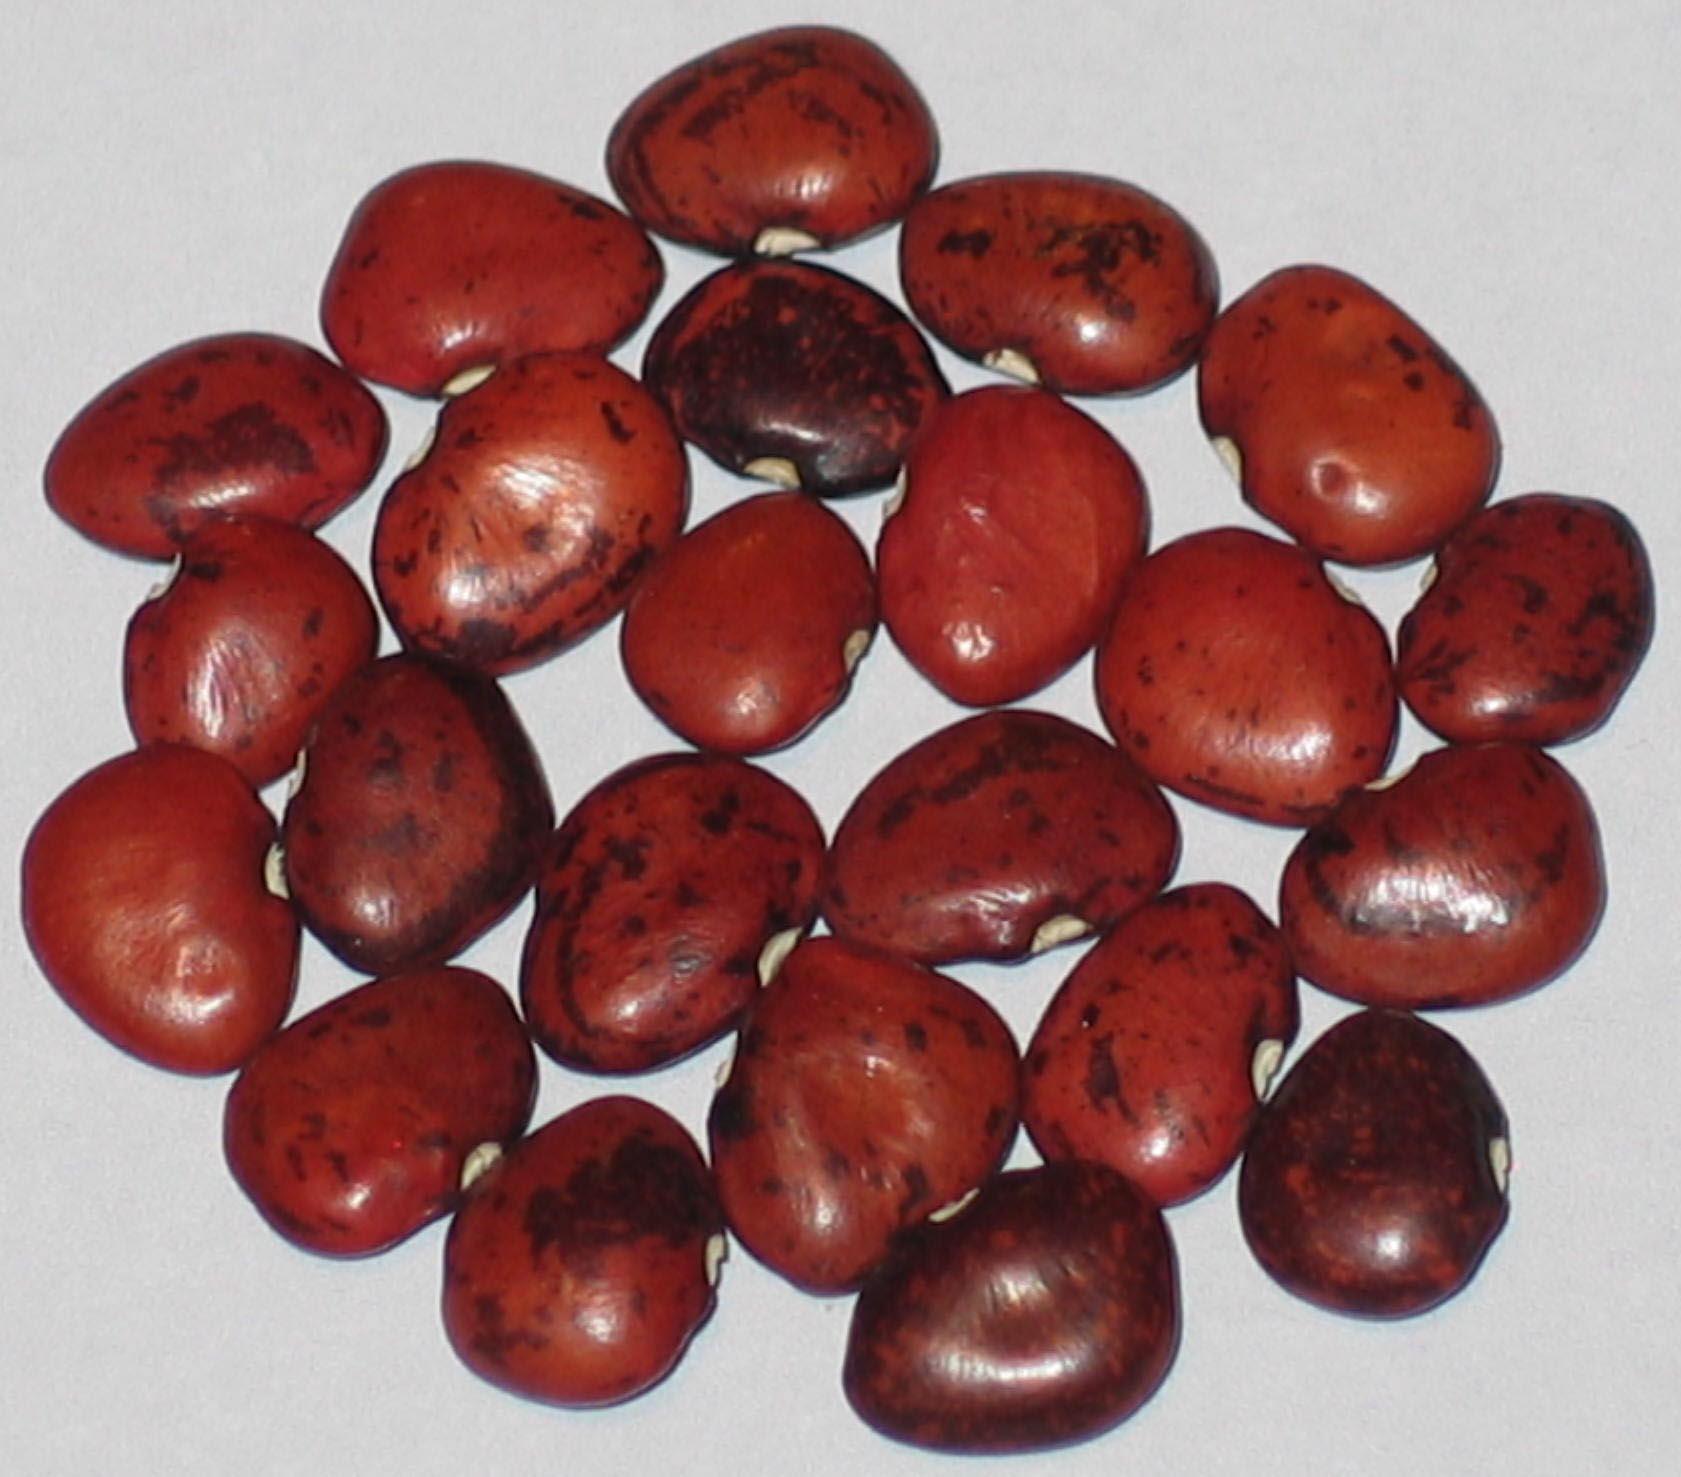 image of Red Willow Leaf beans